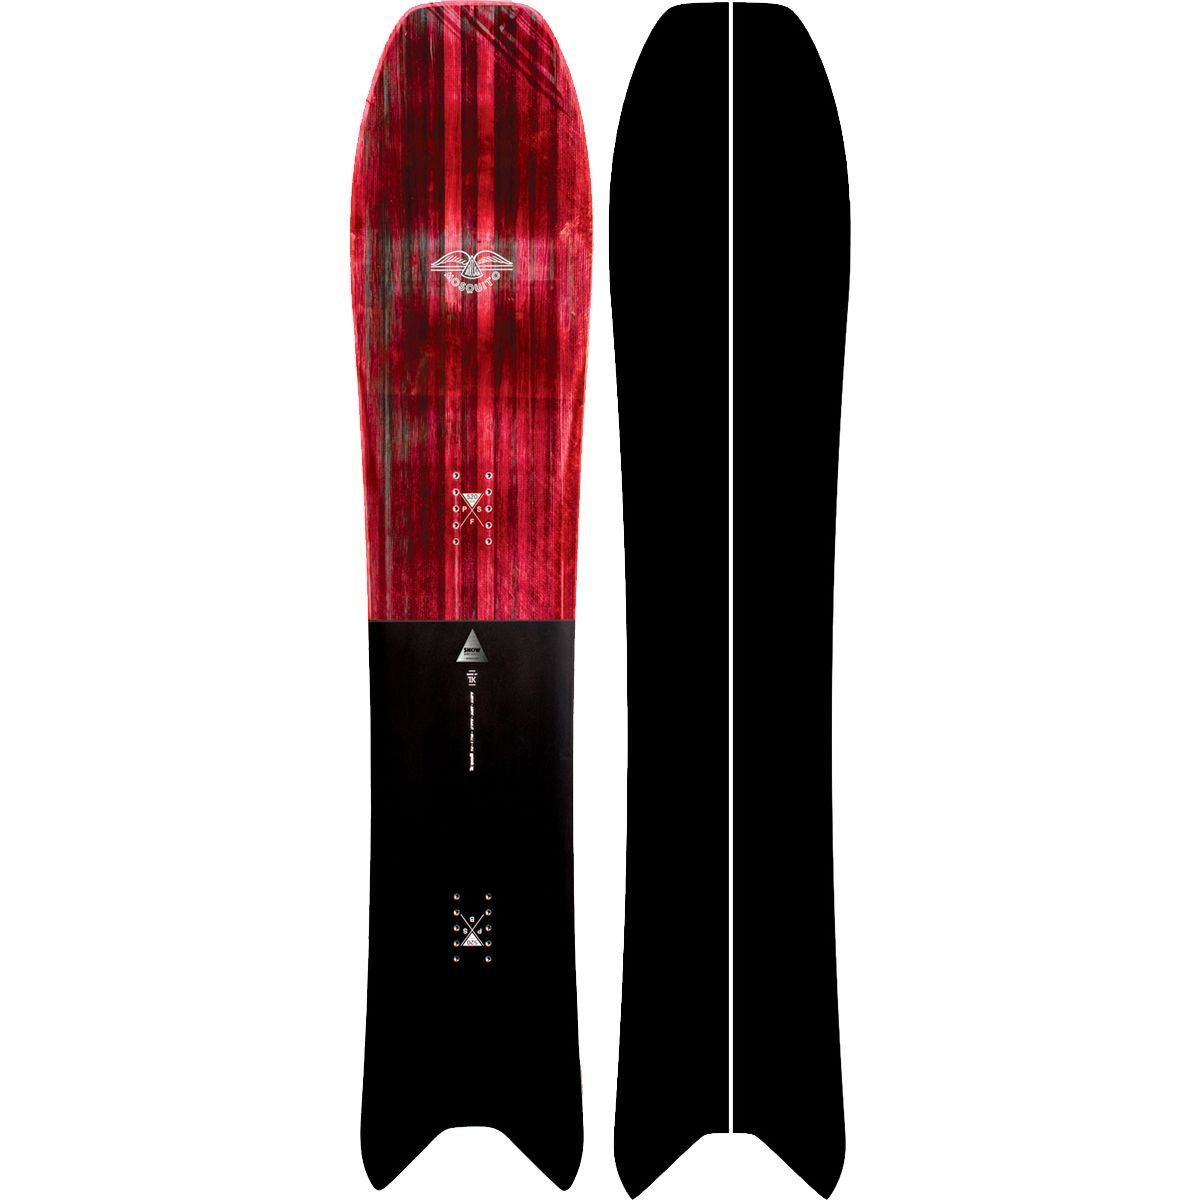 Nidecker The Mosquito Snowboard - 2022